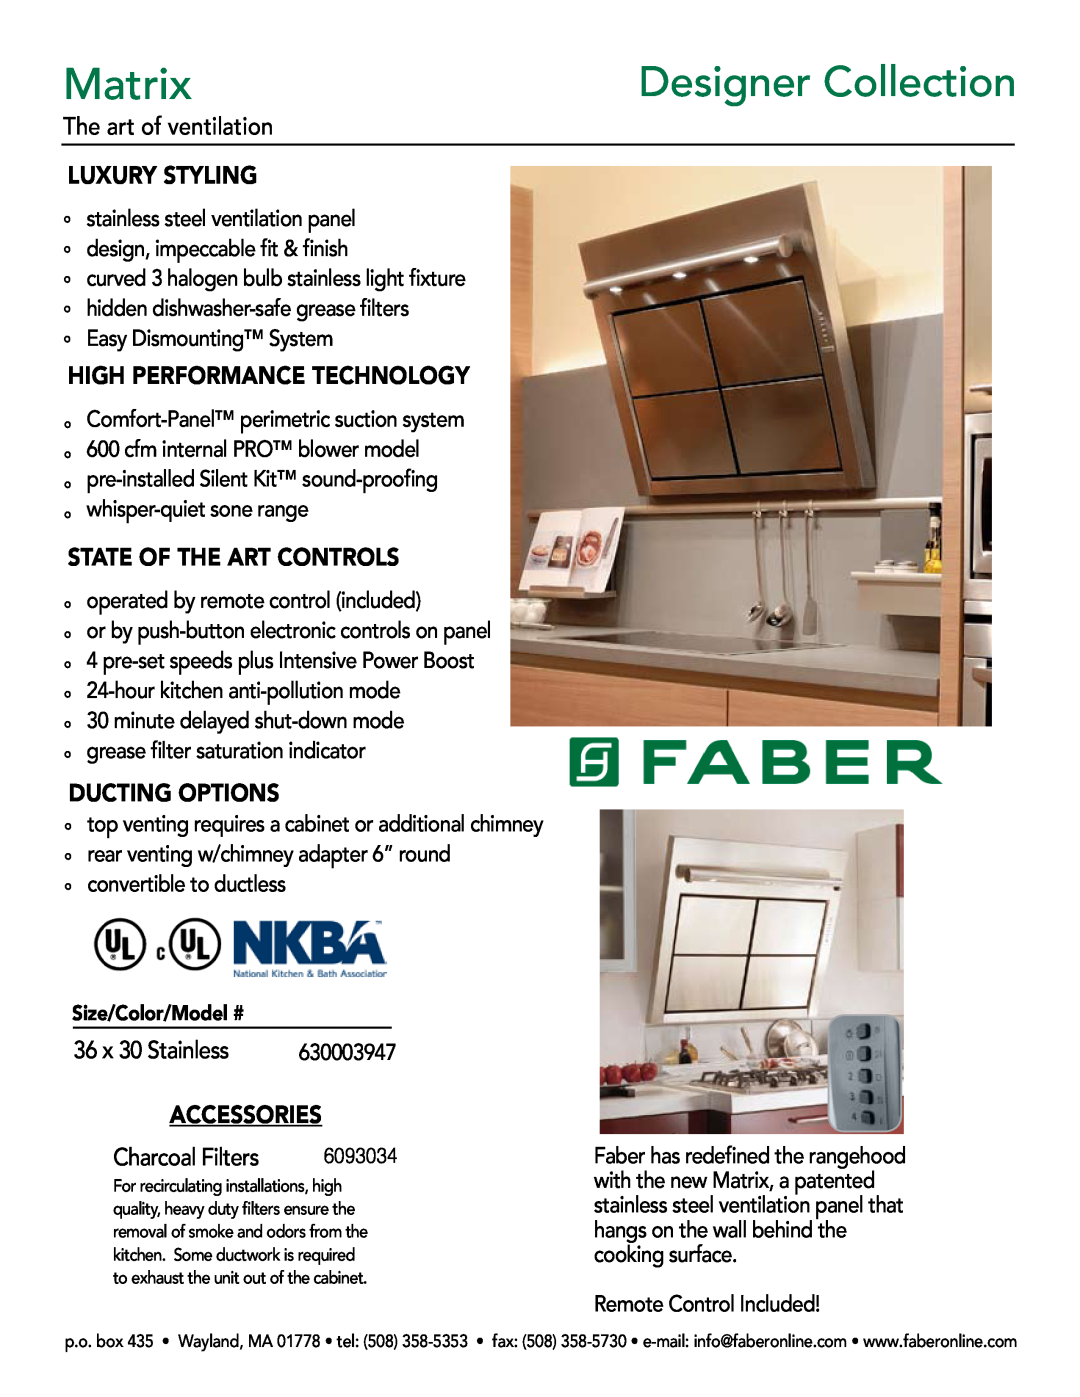 Faber 630003947 manual Matrix, Designer Collection, The art of ventilation, Luxury Styling, High Performance Technology 